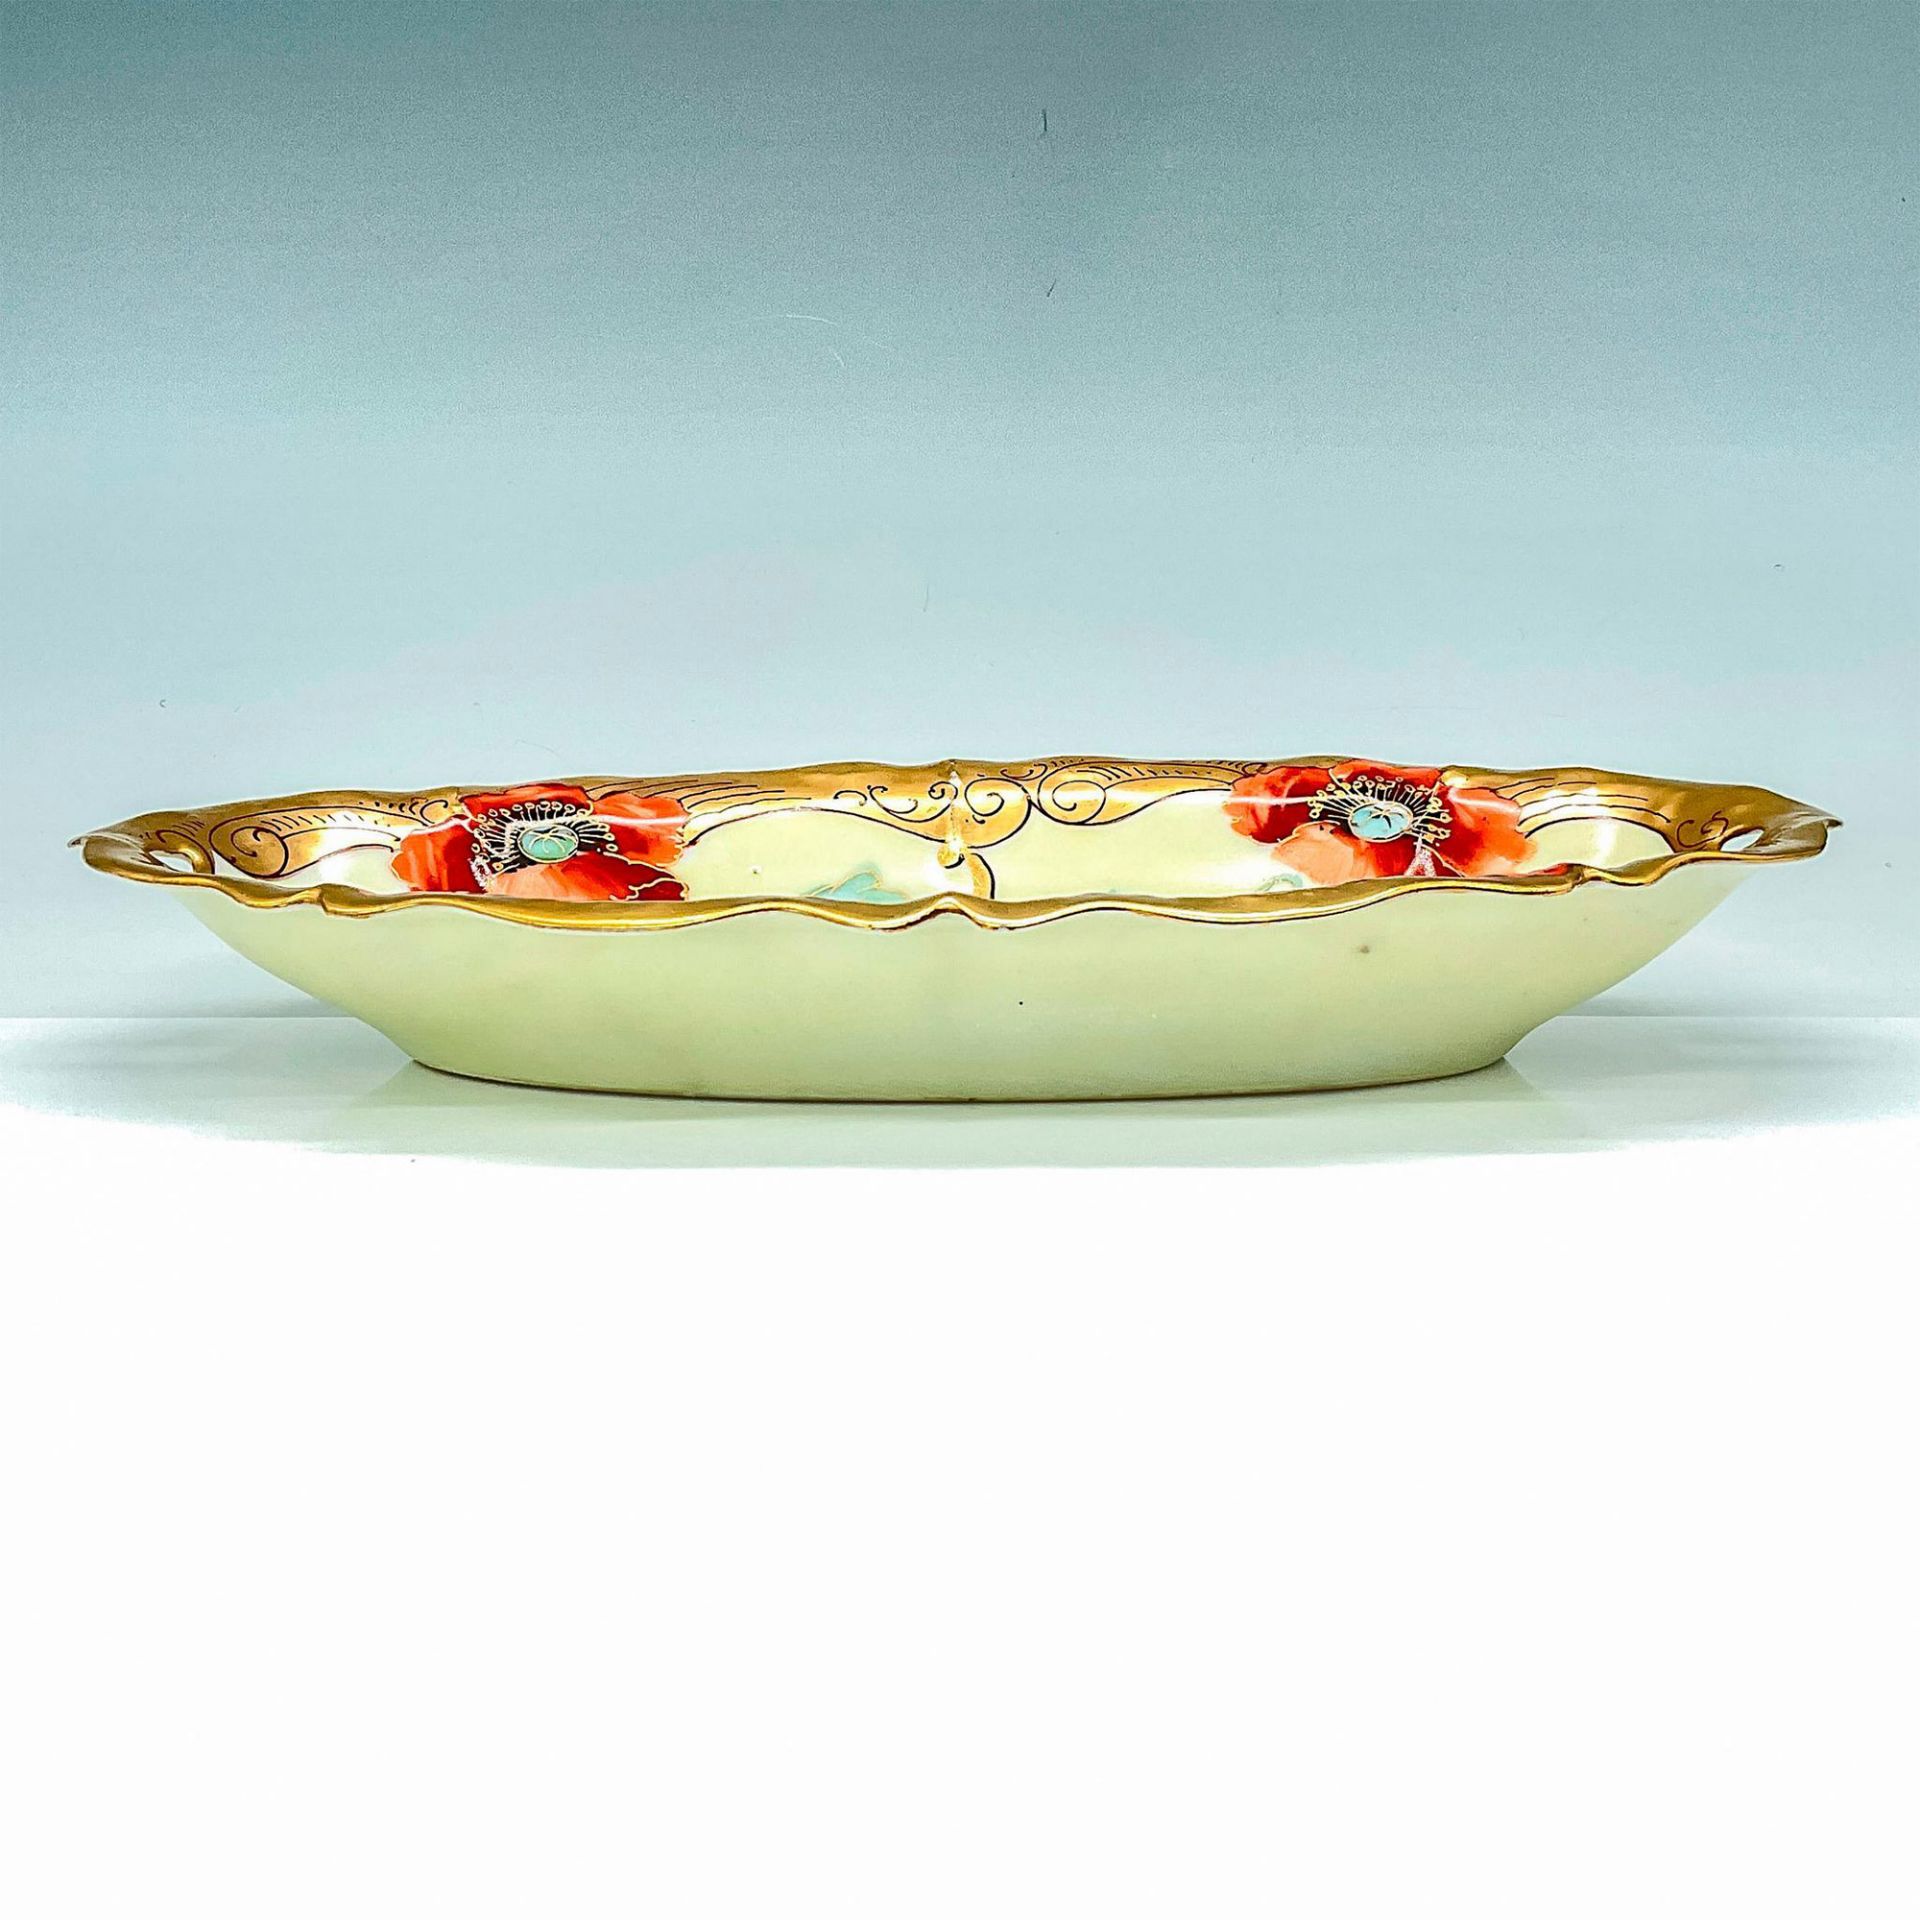 Picard Porcelain Elongated Bowl, Gold with Poppies - Image 2 of 3